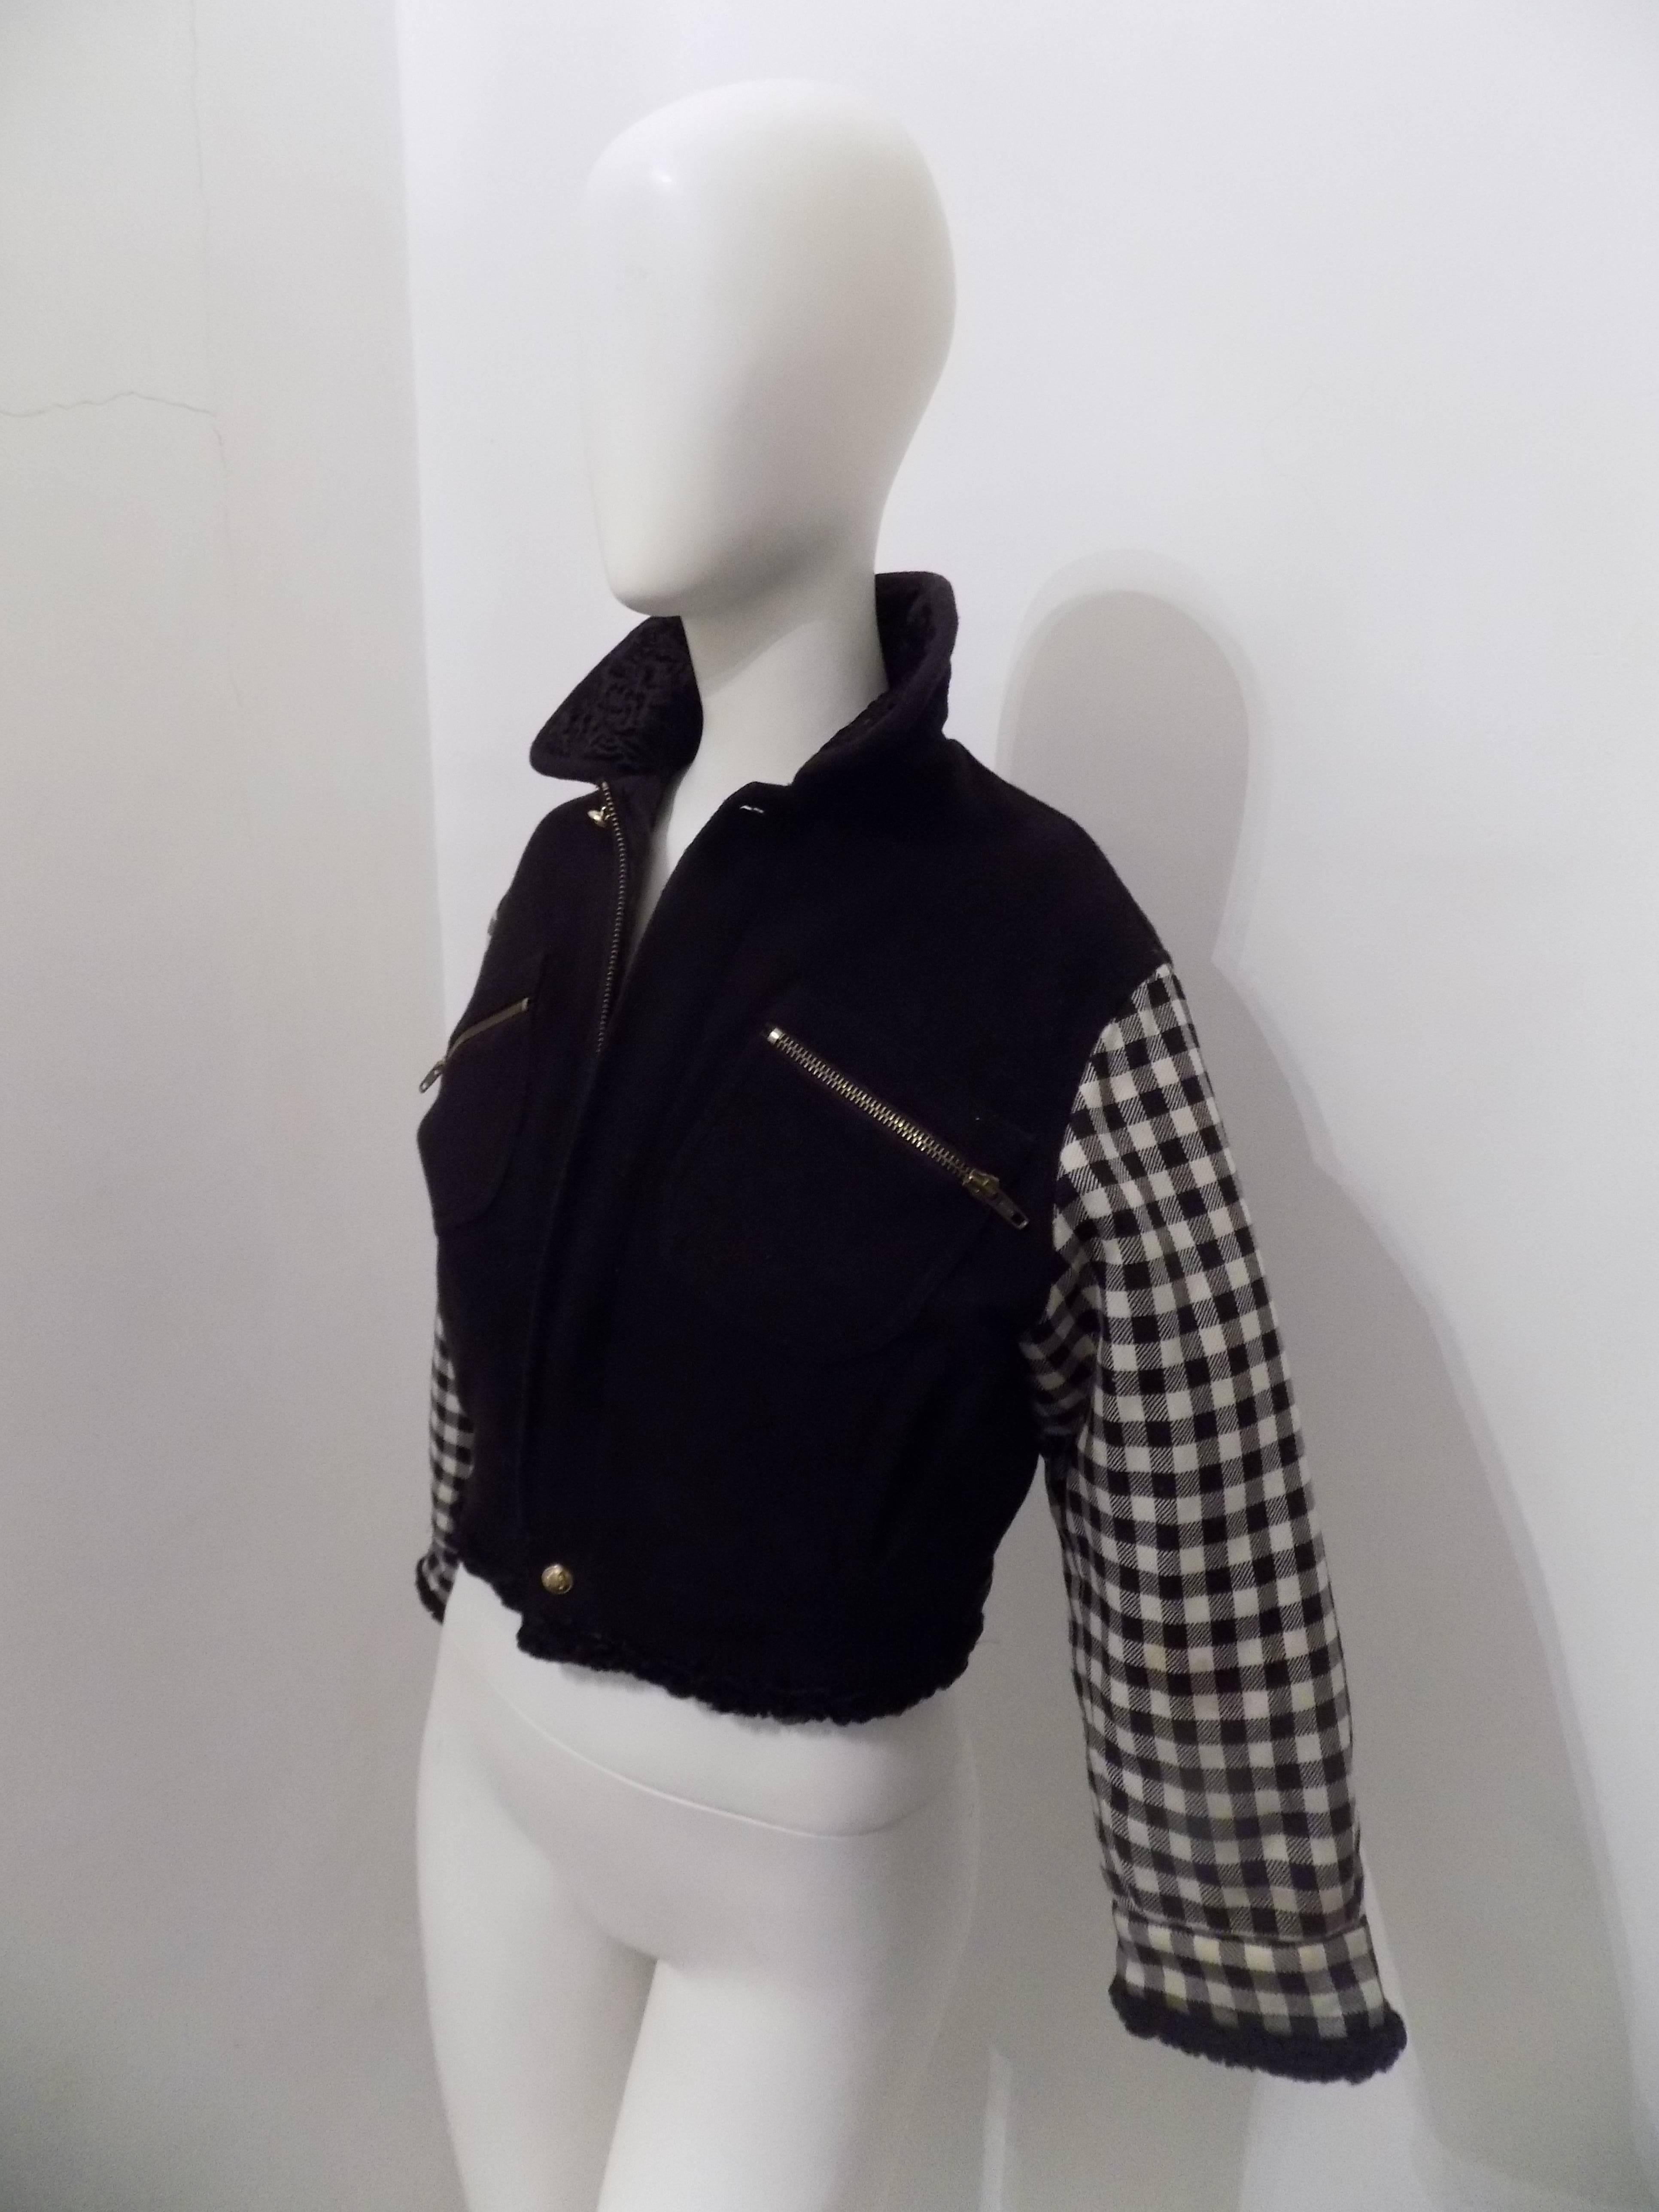 Gianni Versace pied de poule black jacket
totally made in italy in italian size range 38
Composition: wool  and acetate